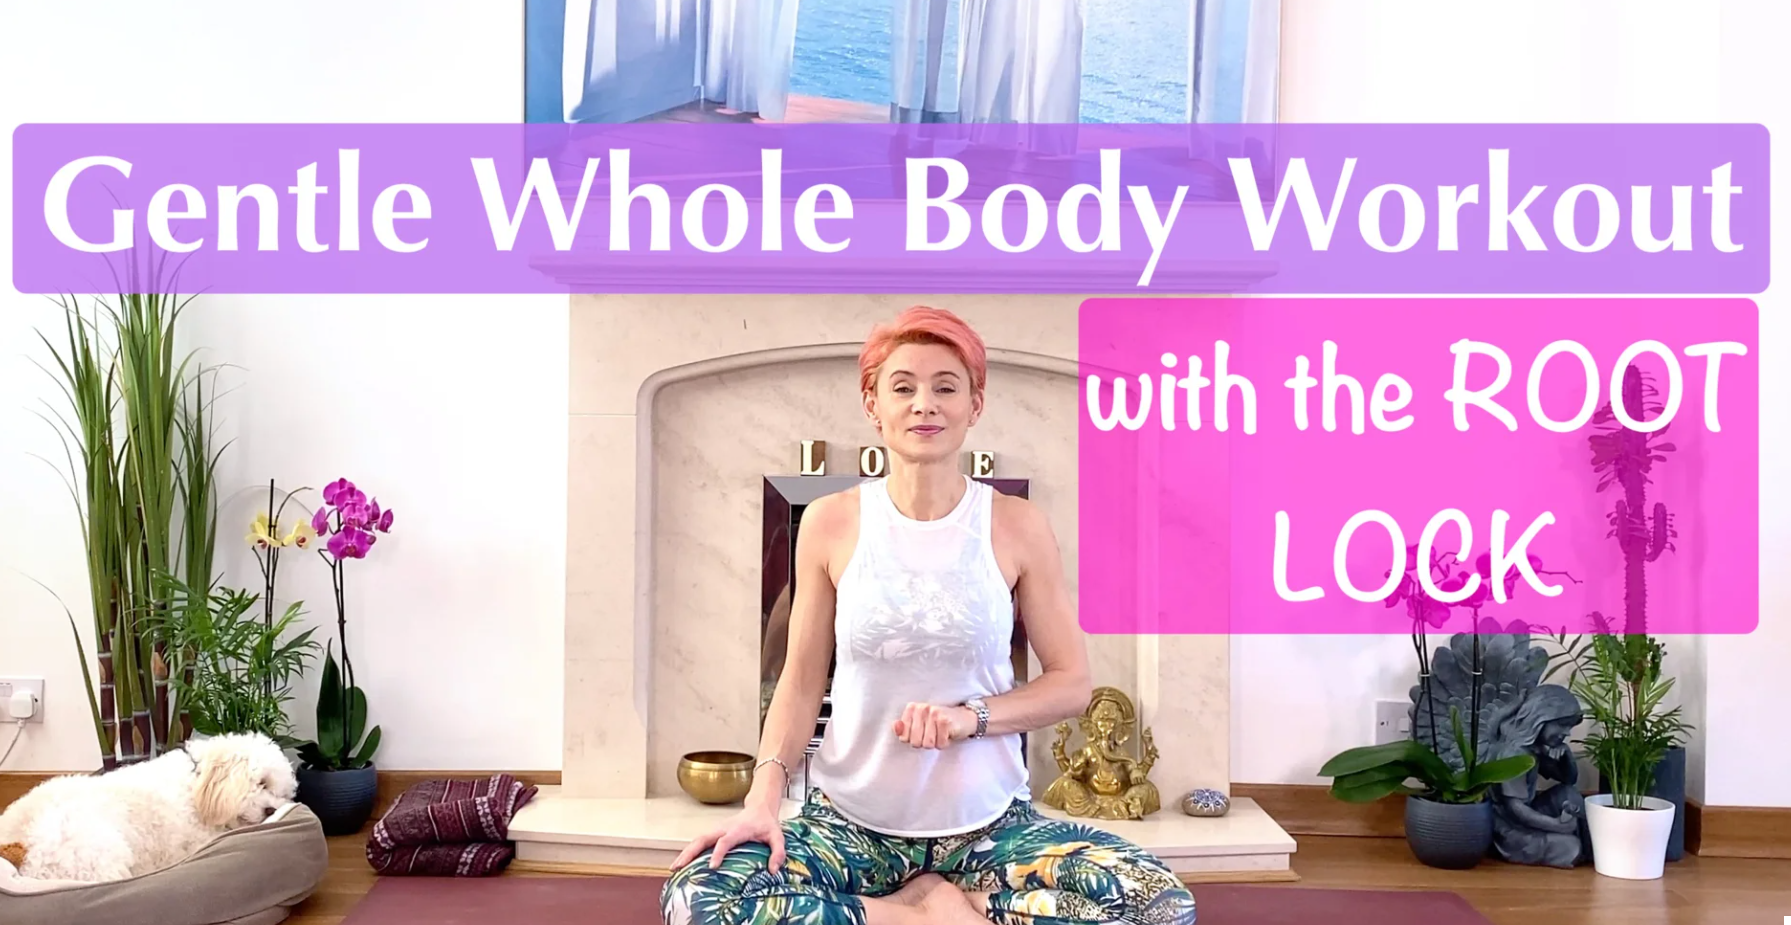 Olga Oakenfold - Gentle Whole Body Workout with the Root Lock